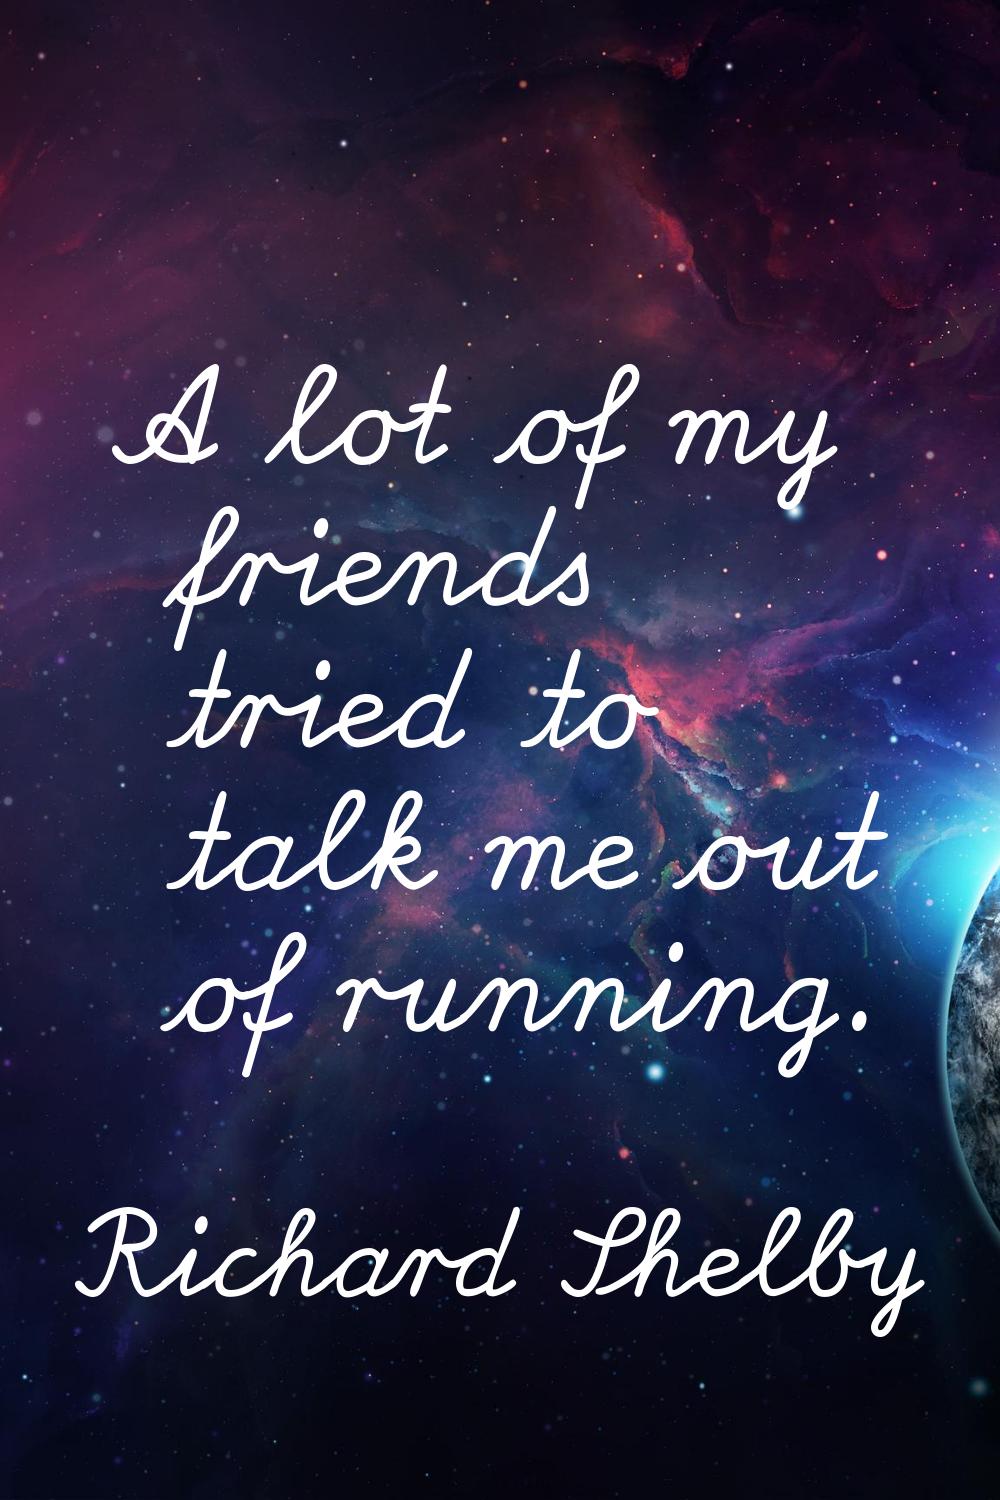 A lot of my friends tried to talk me out of running.